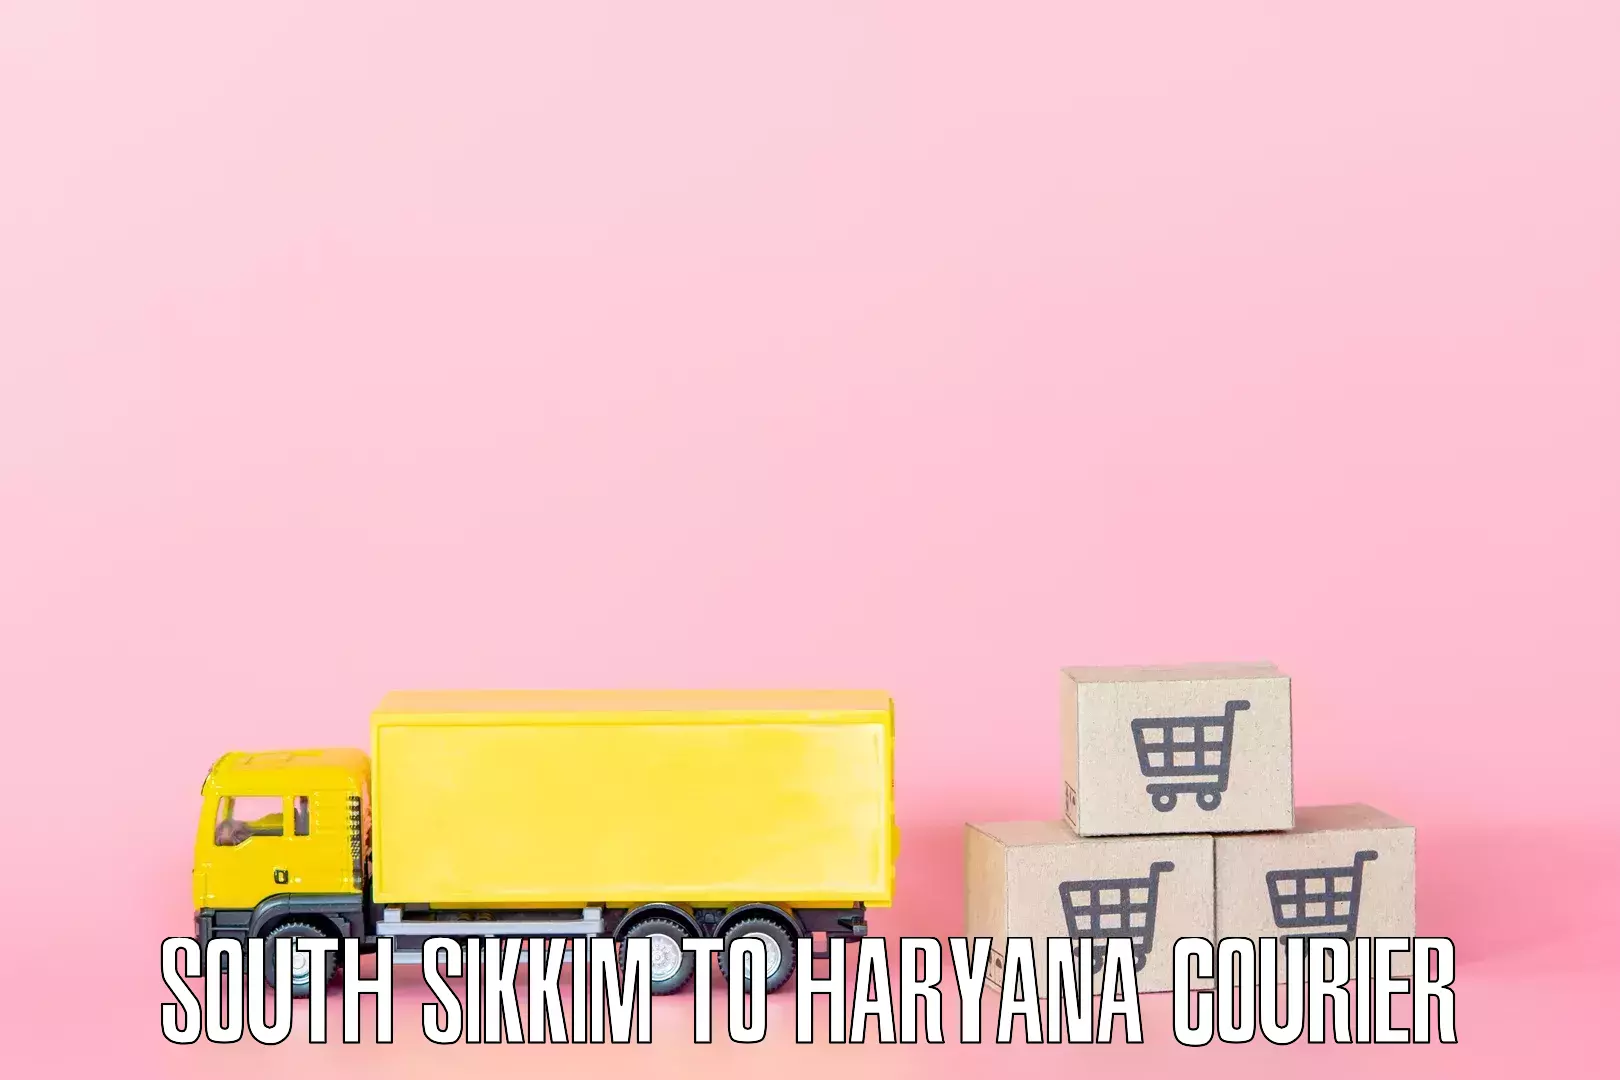 Budget-friendly movers South Sikkim to Haryana